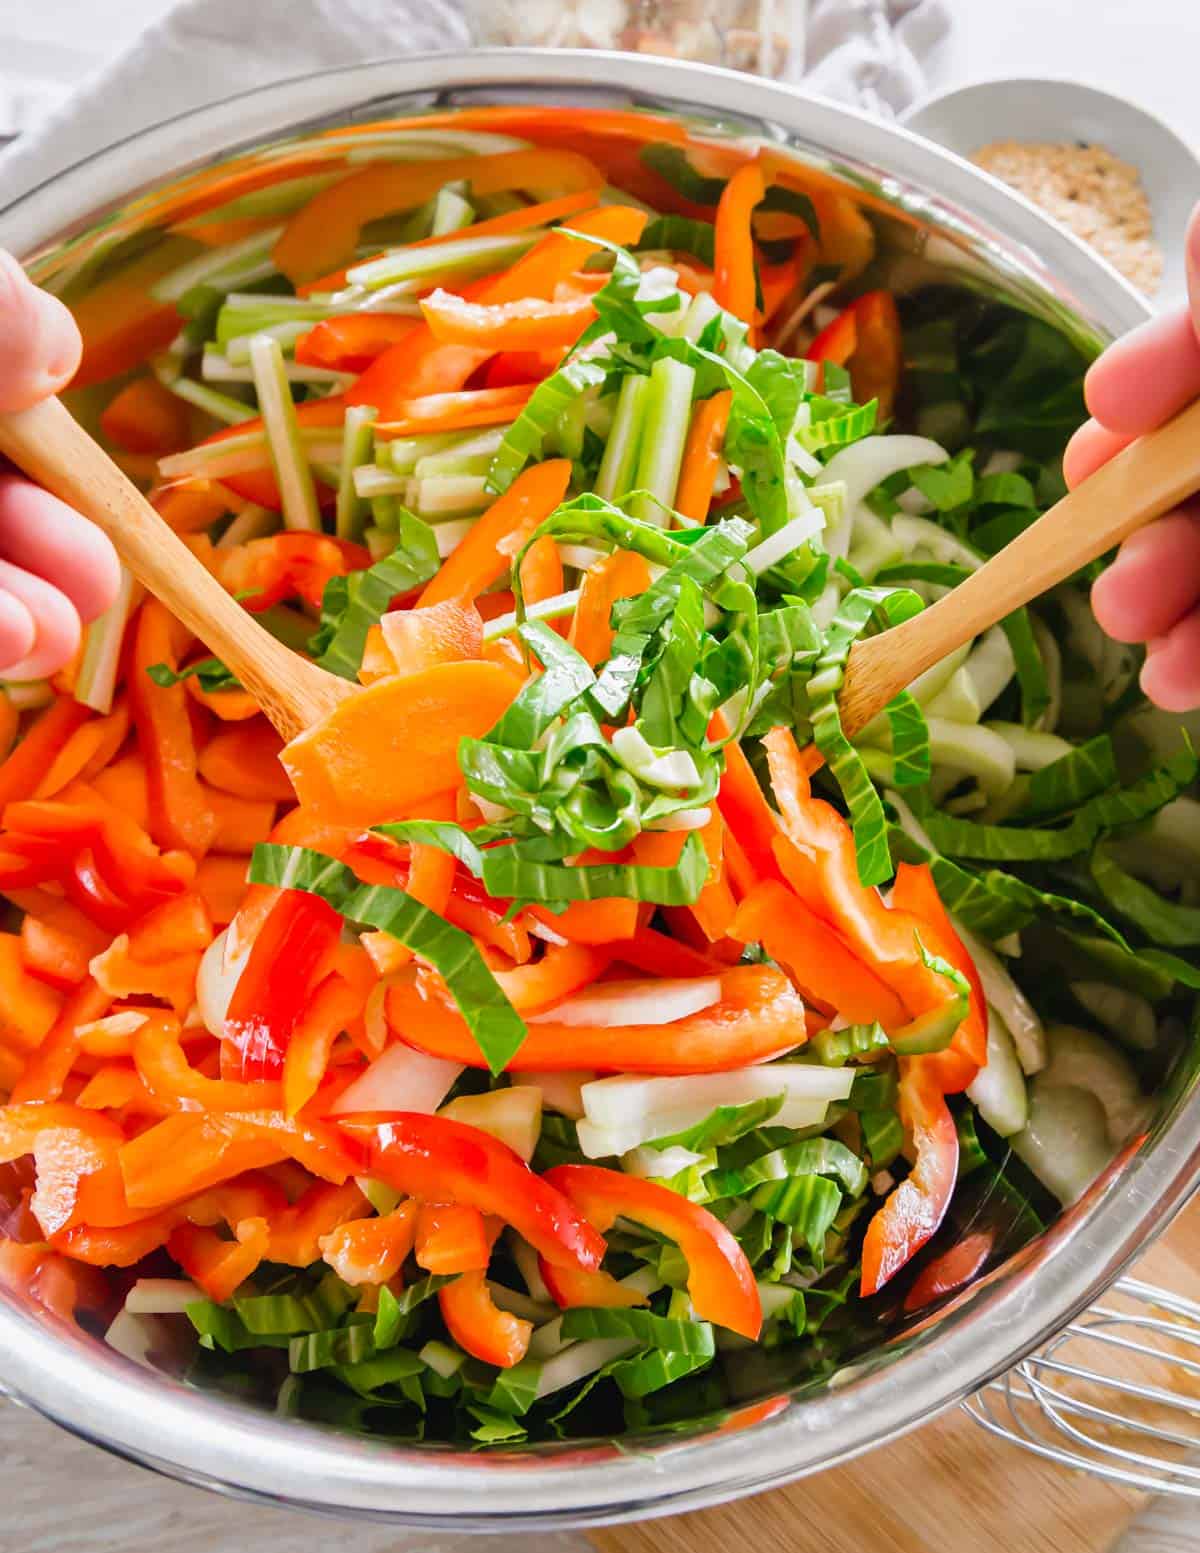 baby bok choy, red bell peppers, celery and carrots make this bok choy salad crispy, crunchy and a deliciously fresh meal.